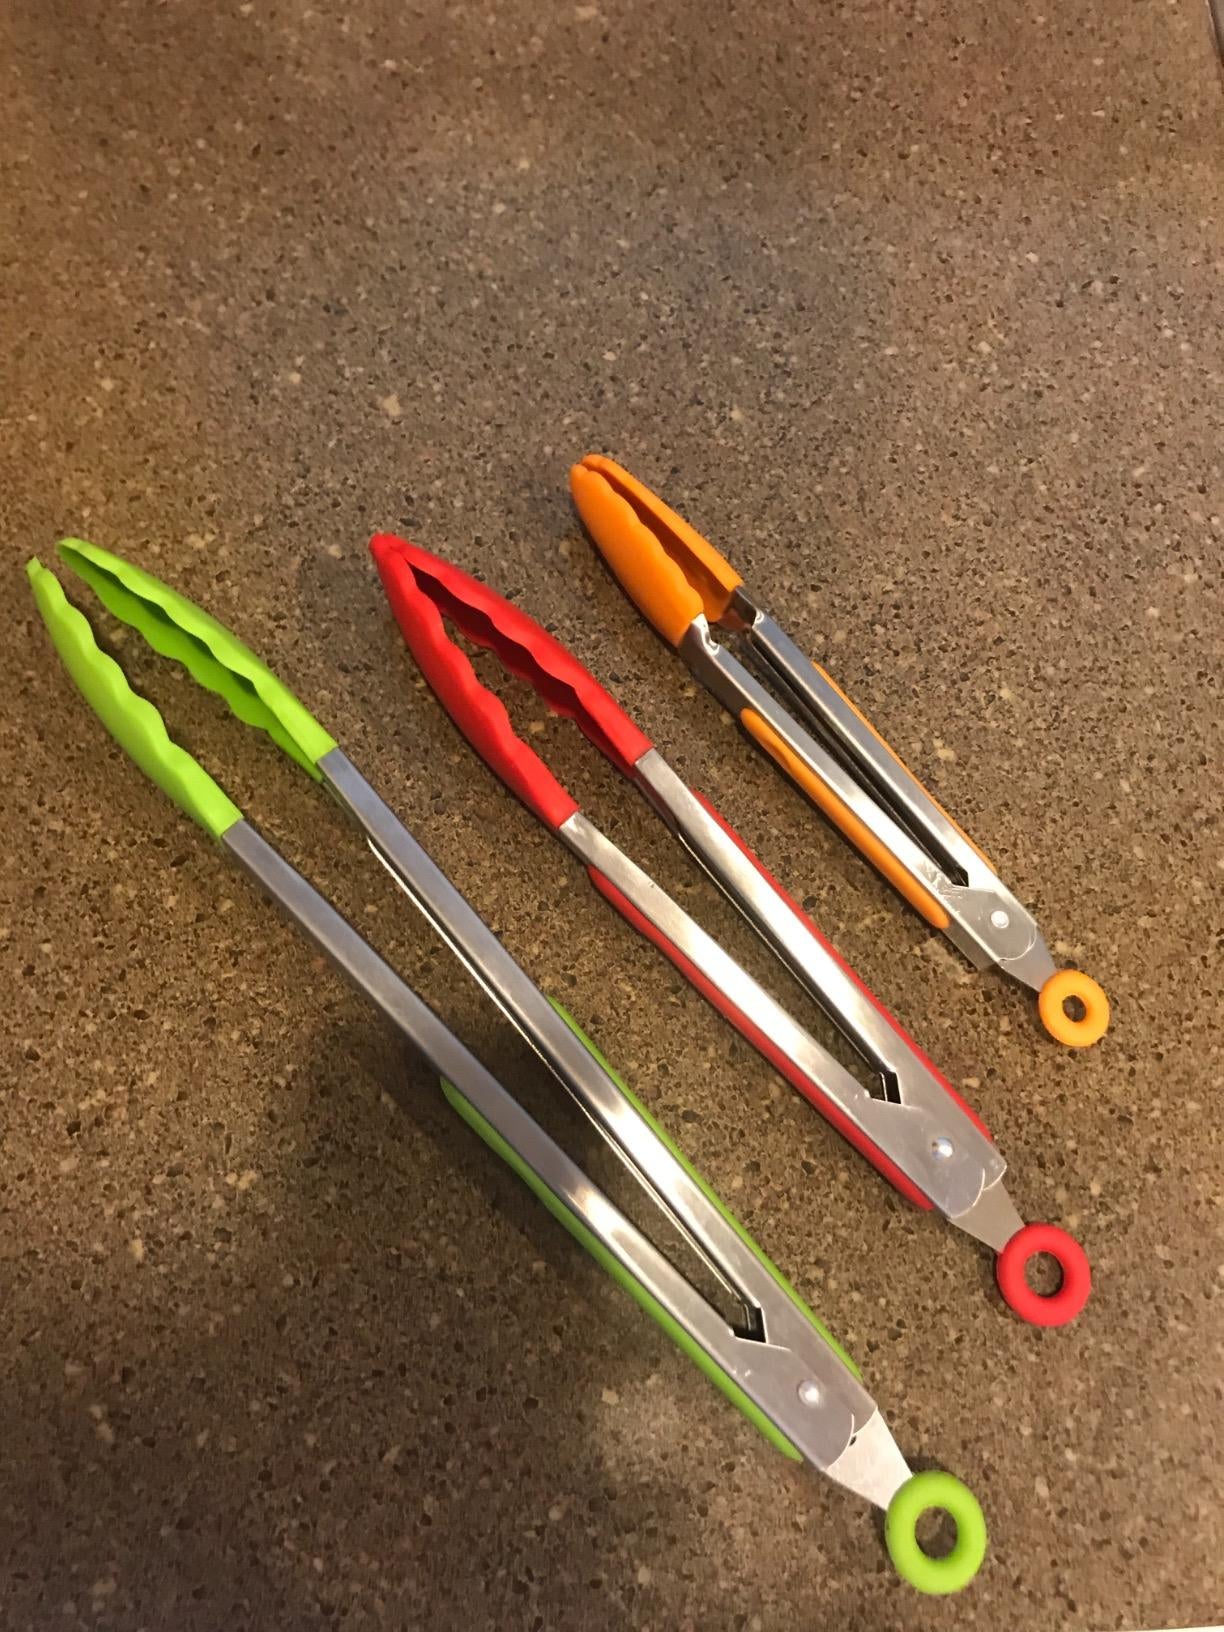 Reviewer photo of the three tongs — one big green one, one medium red one, and one small orange one